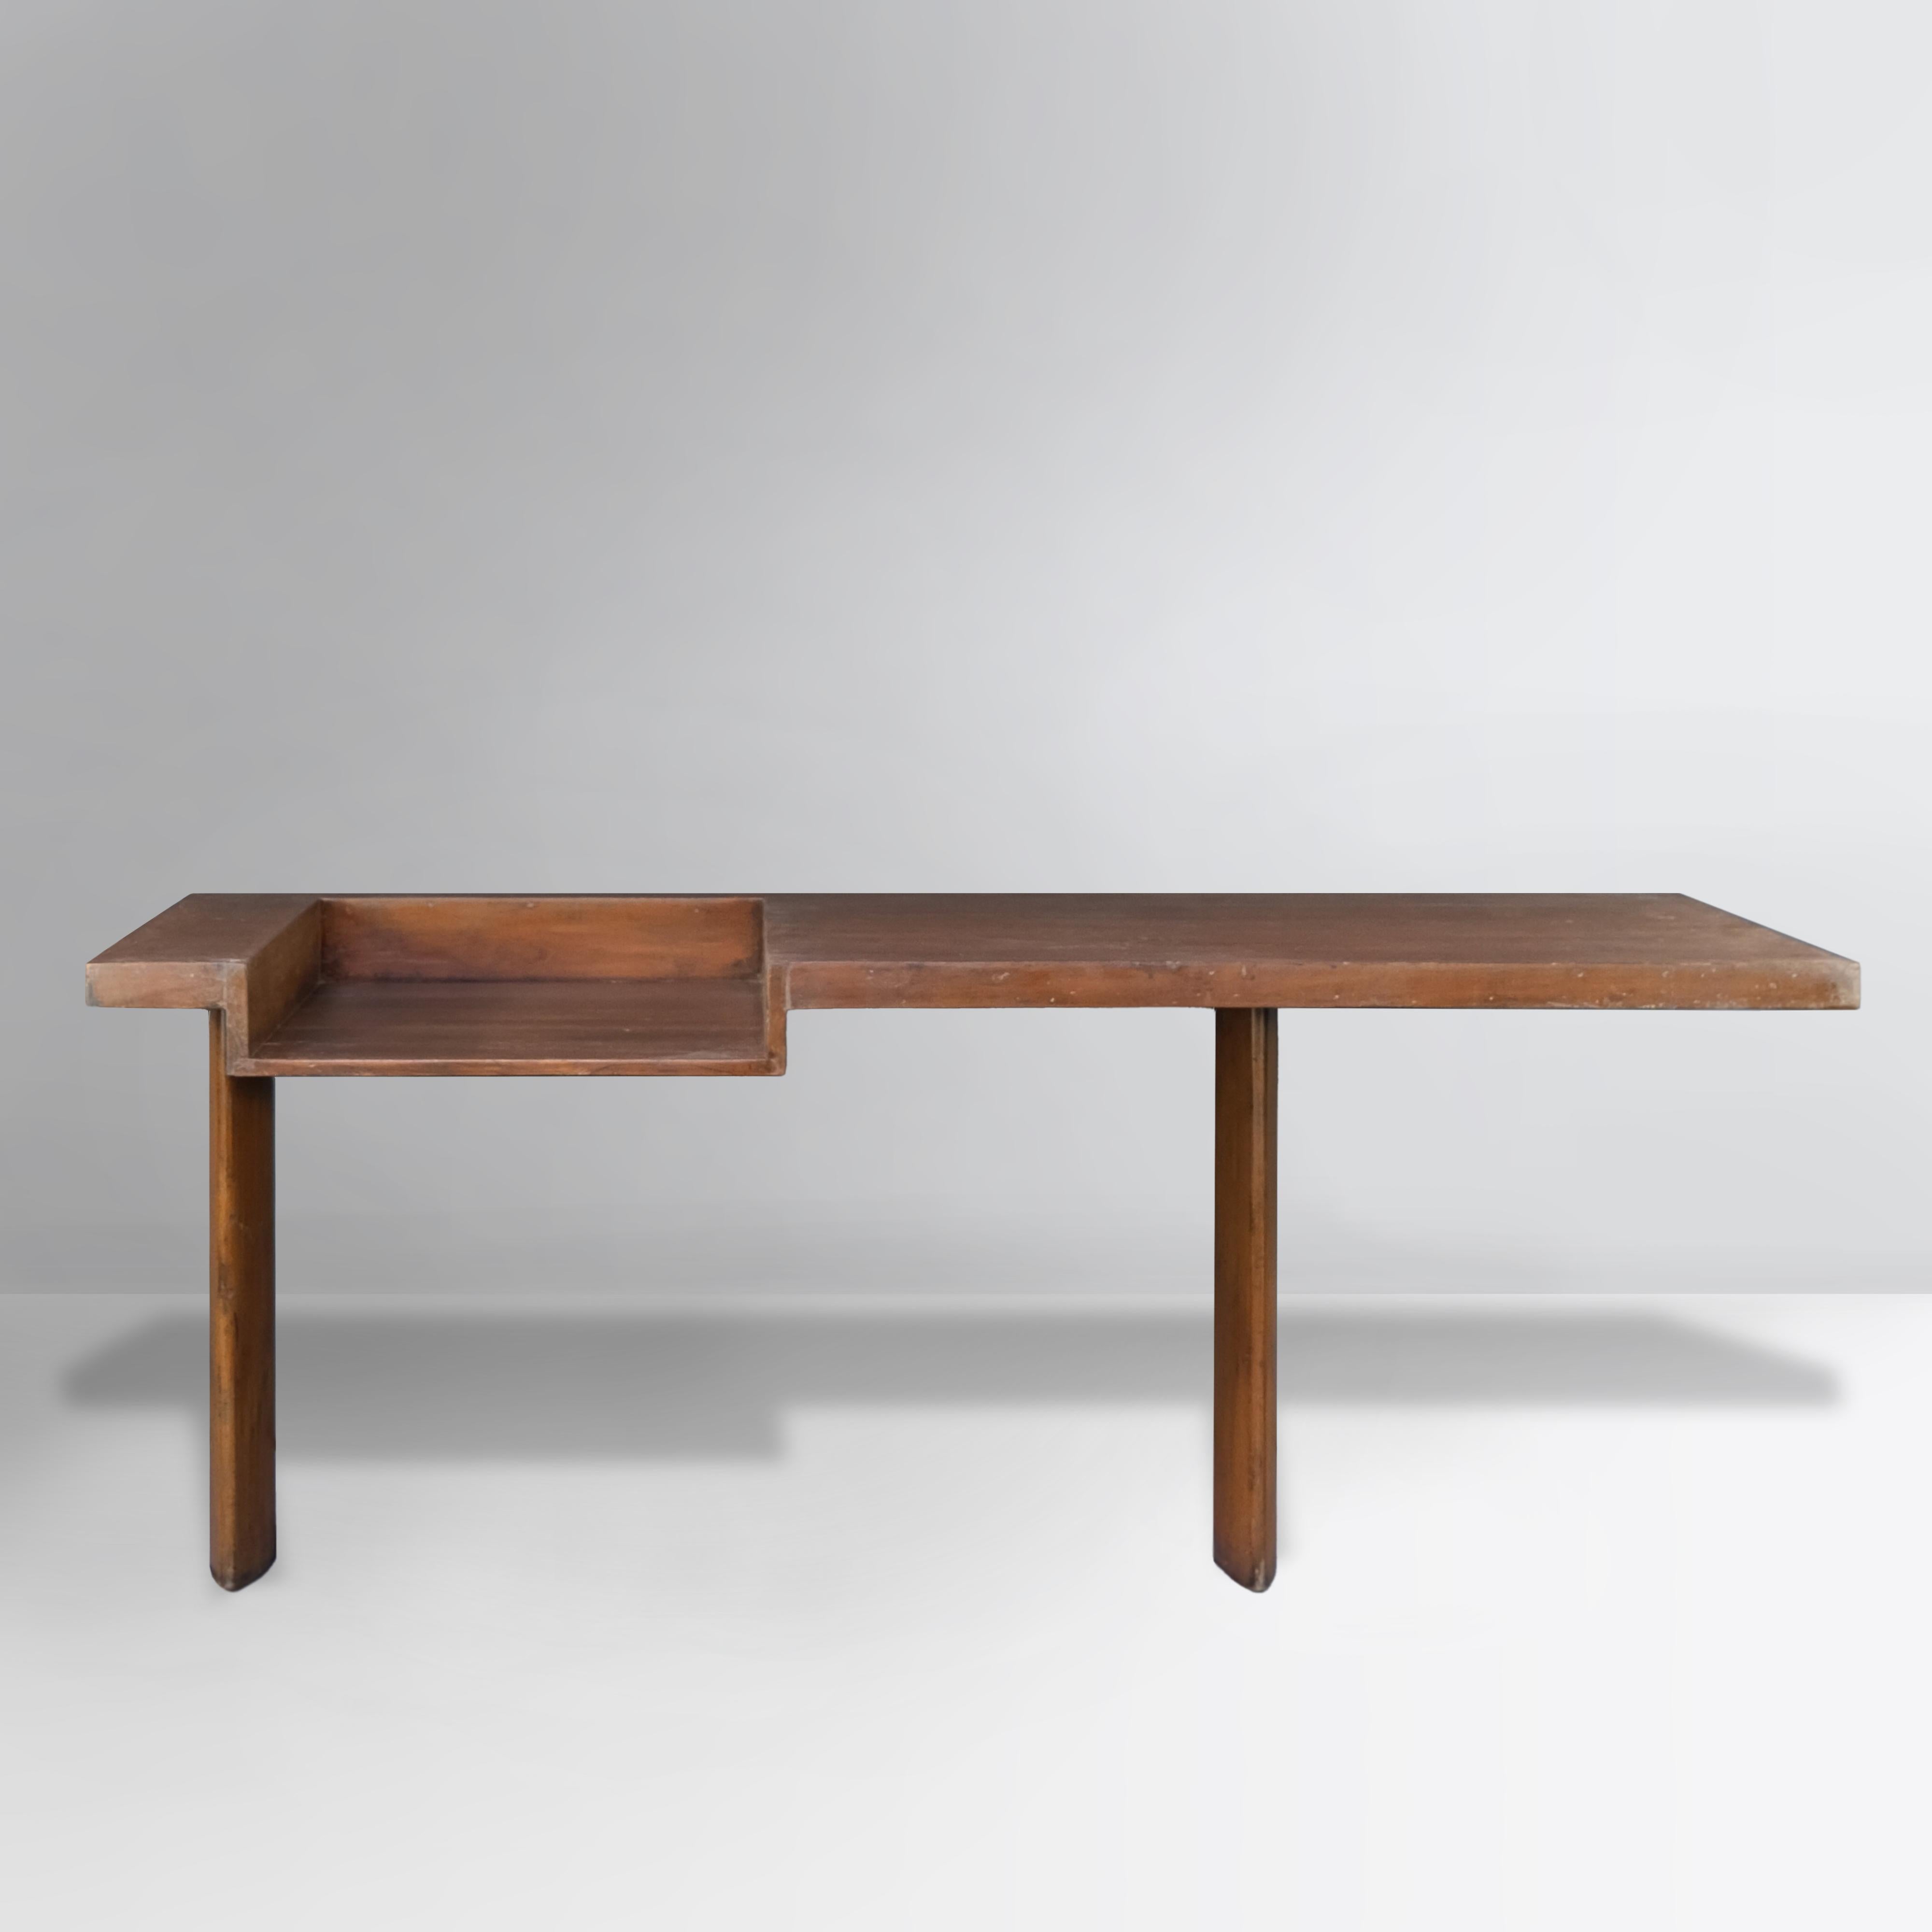 This console desk was created by B. Doshi and Le Corbusier. It is not only a very rare piece but also an item of museum quality. It is raw in its simplicity and splendid with that solid teak wood, which shows a strongly patinated material. We didn't